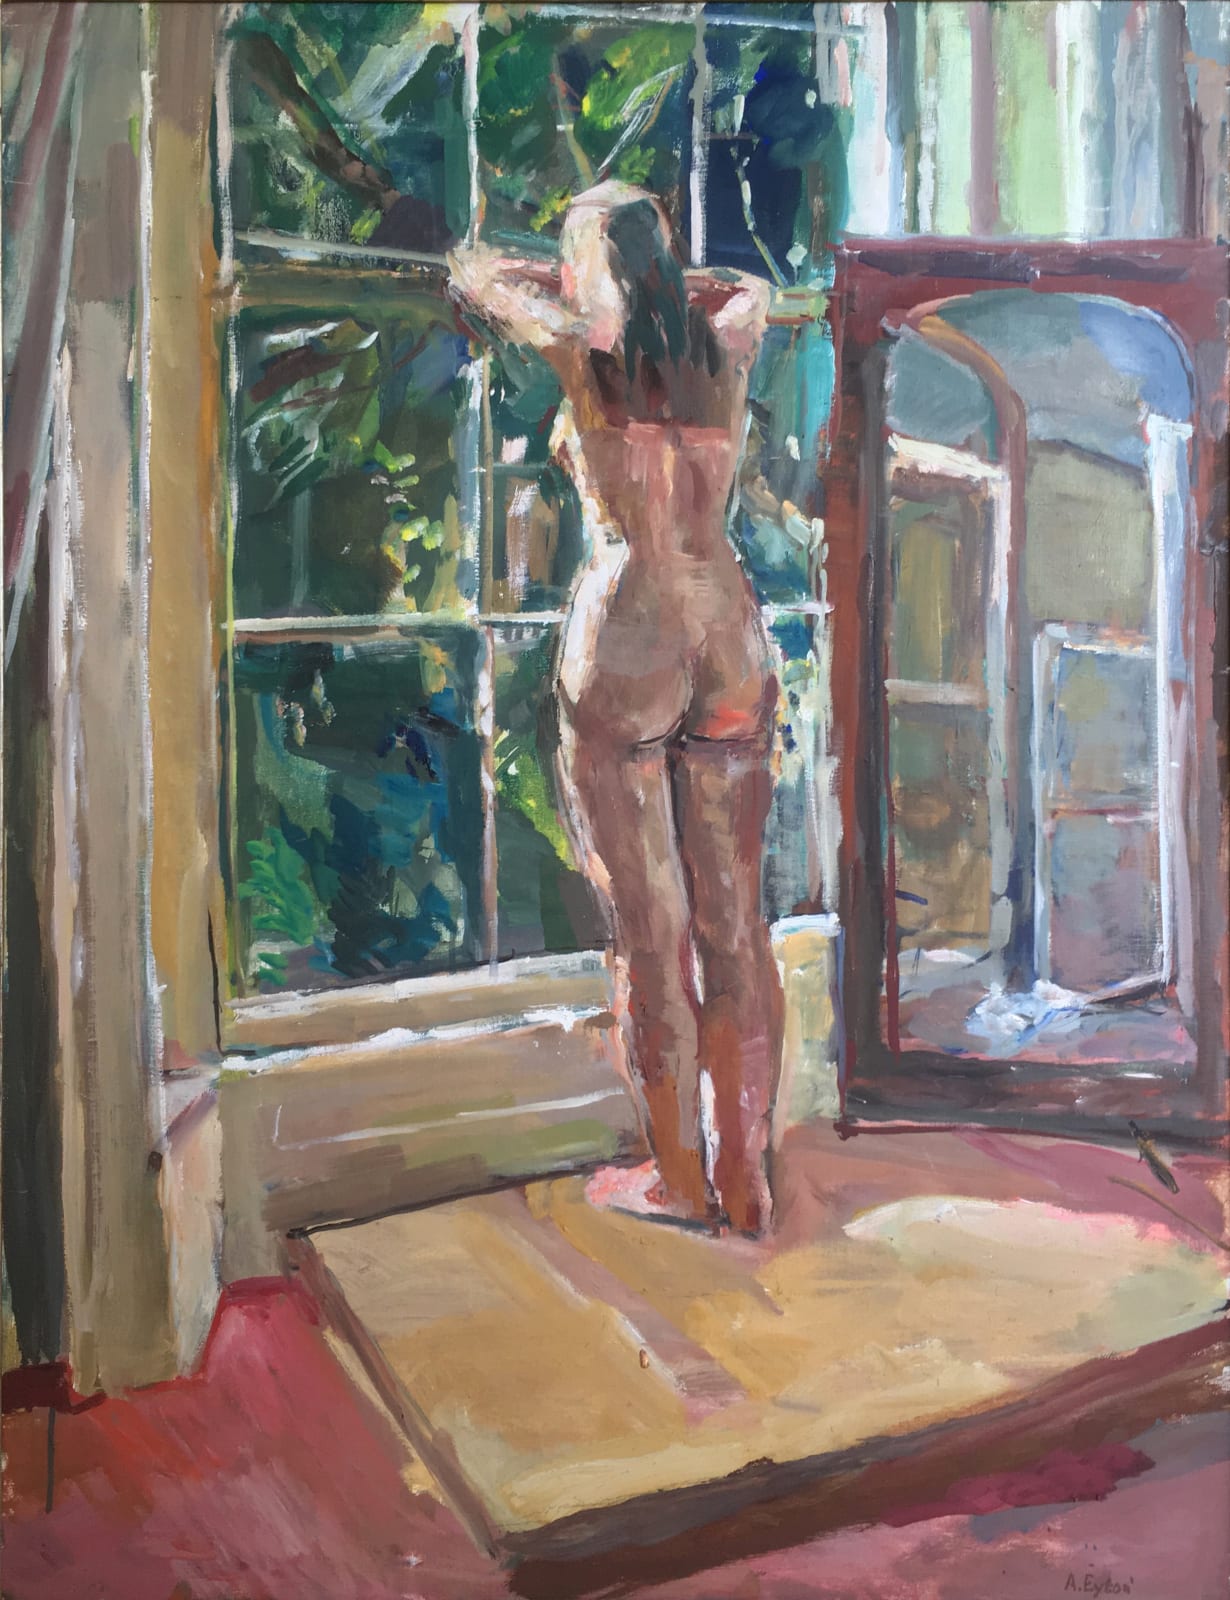 ANTHONY EYTON, Nude By The Window, 2001